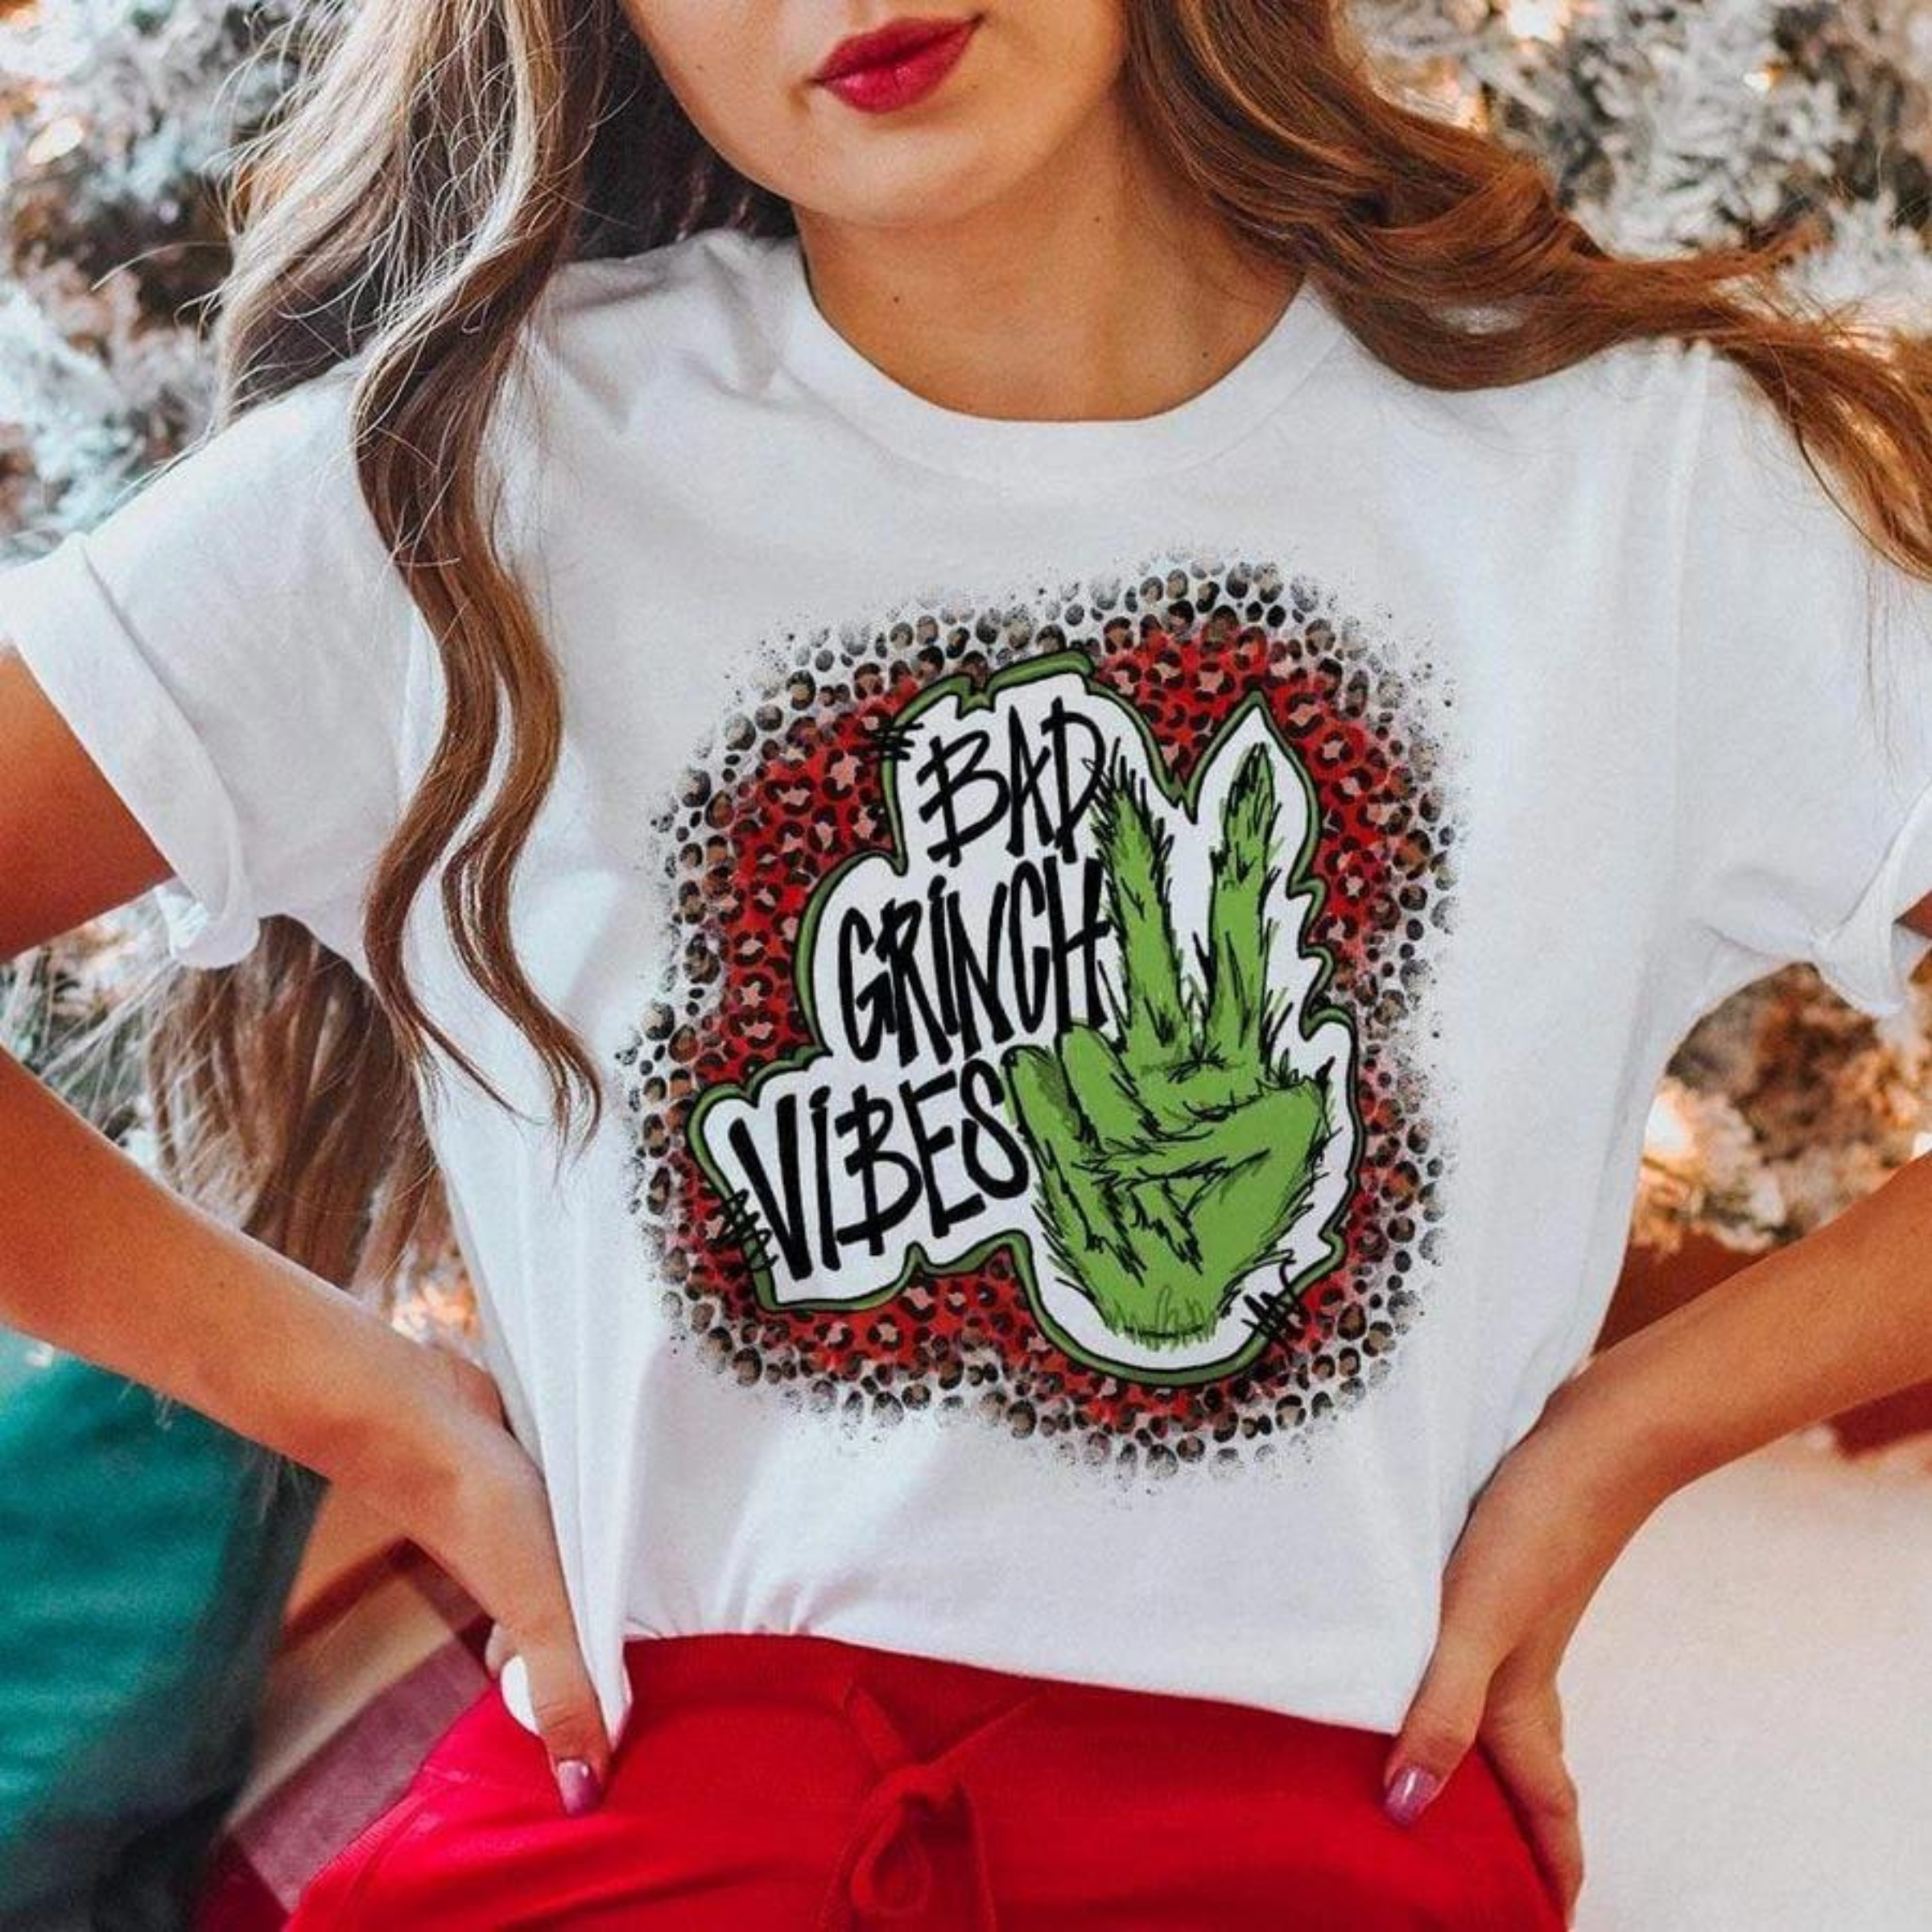 Model is wearing a white tee shirt that has a red leopard graphic with a grinch hand throwing a peace sign. The graphic says "Bad Grinch Vibes". This graphic tee is styled with rolled sleeves and a pair of red pants. 